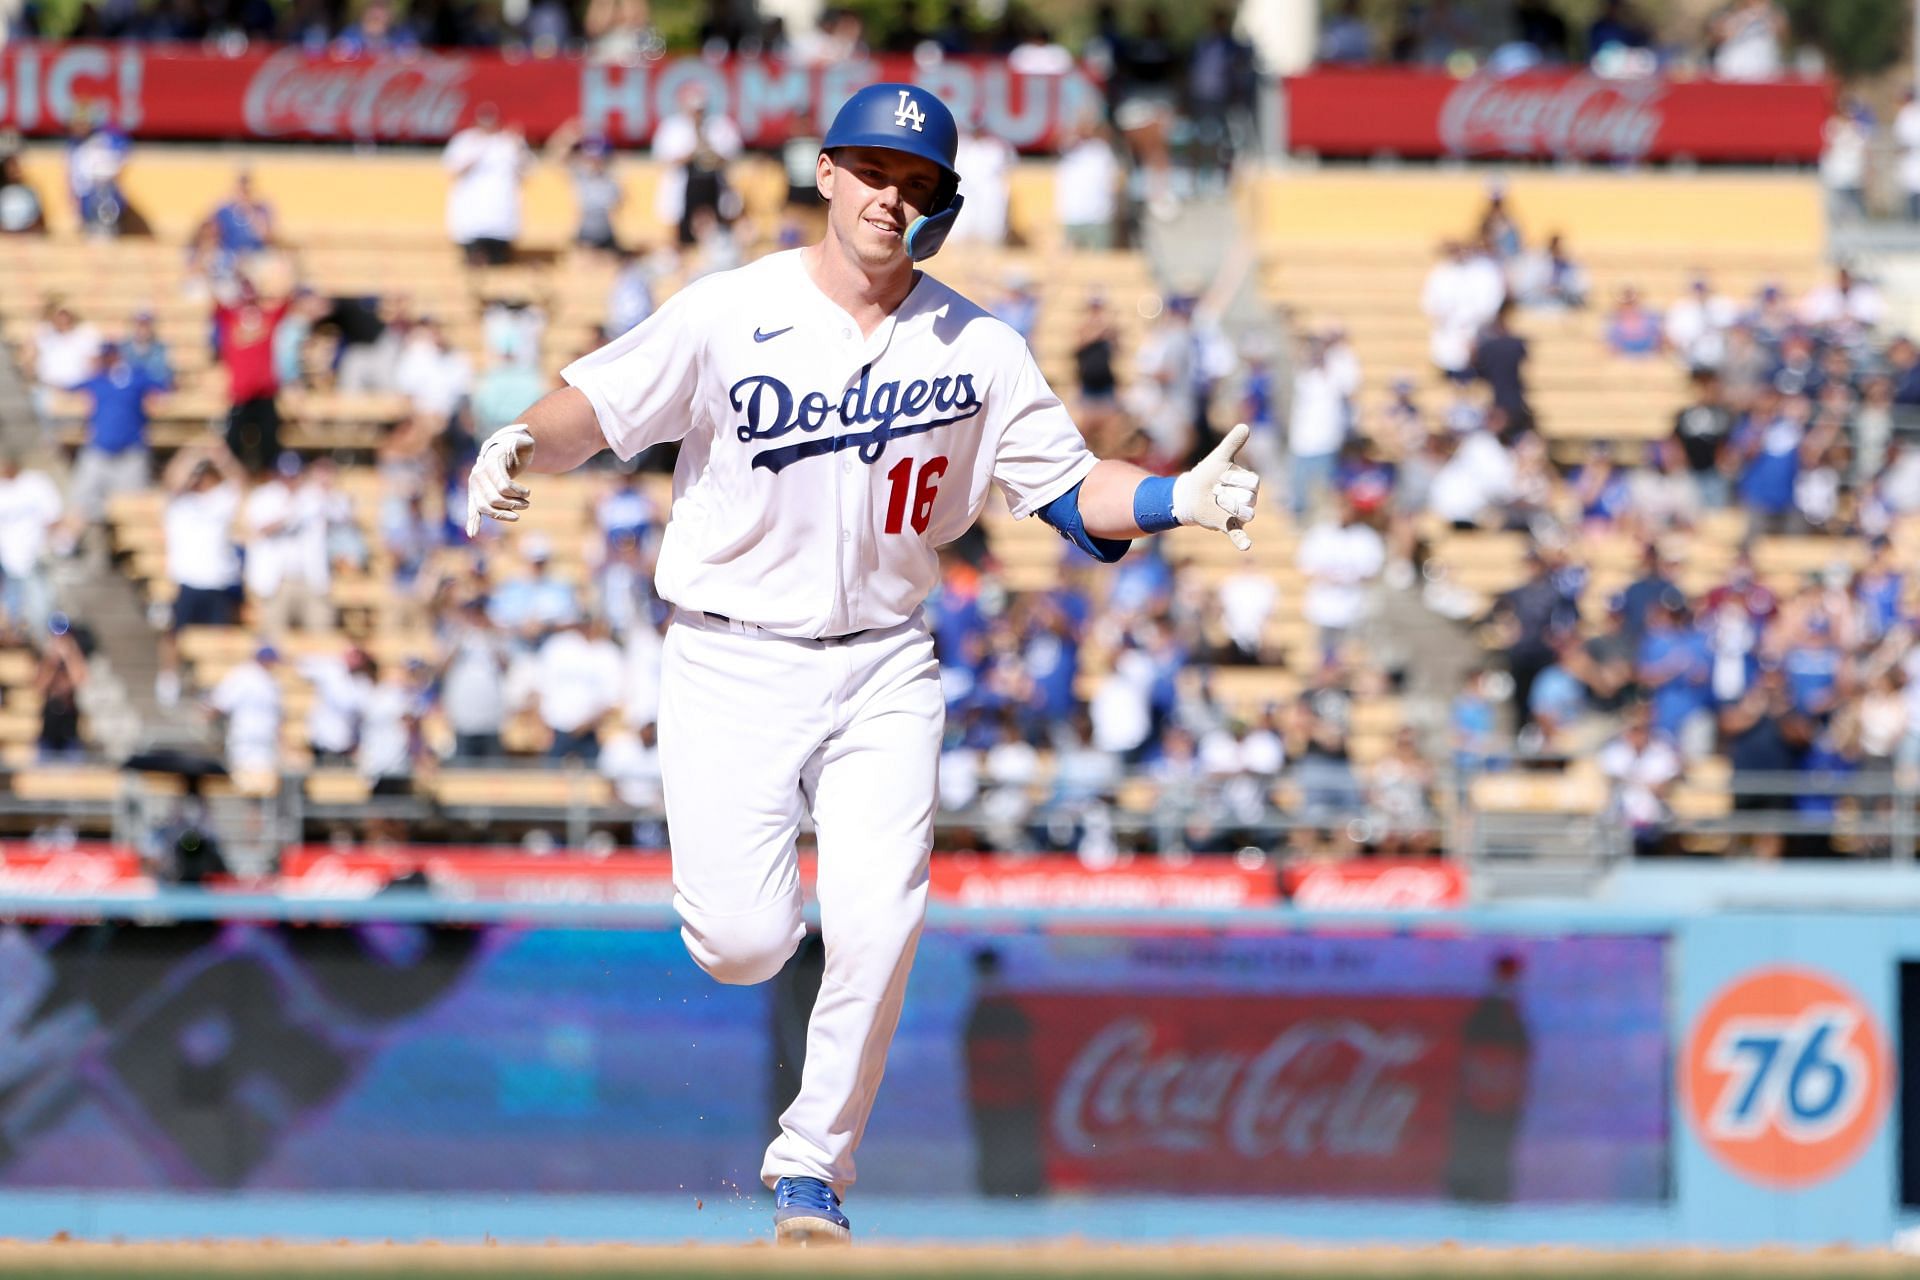 Los Angeles Dodgers catcher Will Smith beat the Chicago White Sox in two home runs.